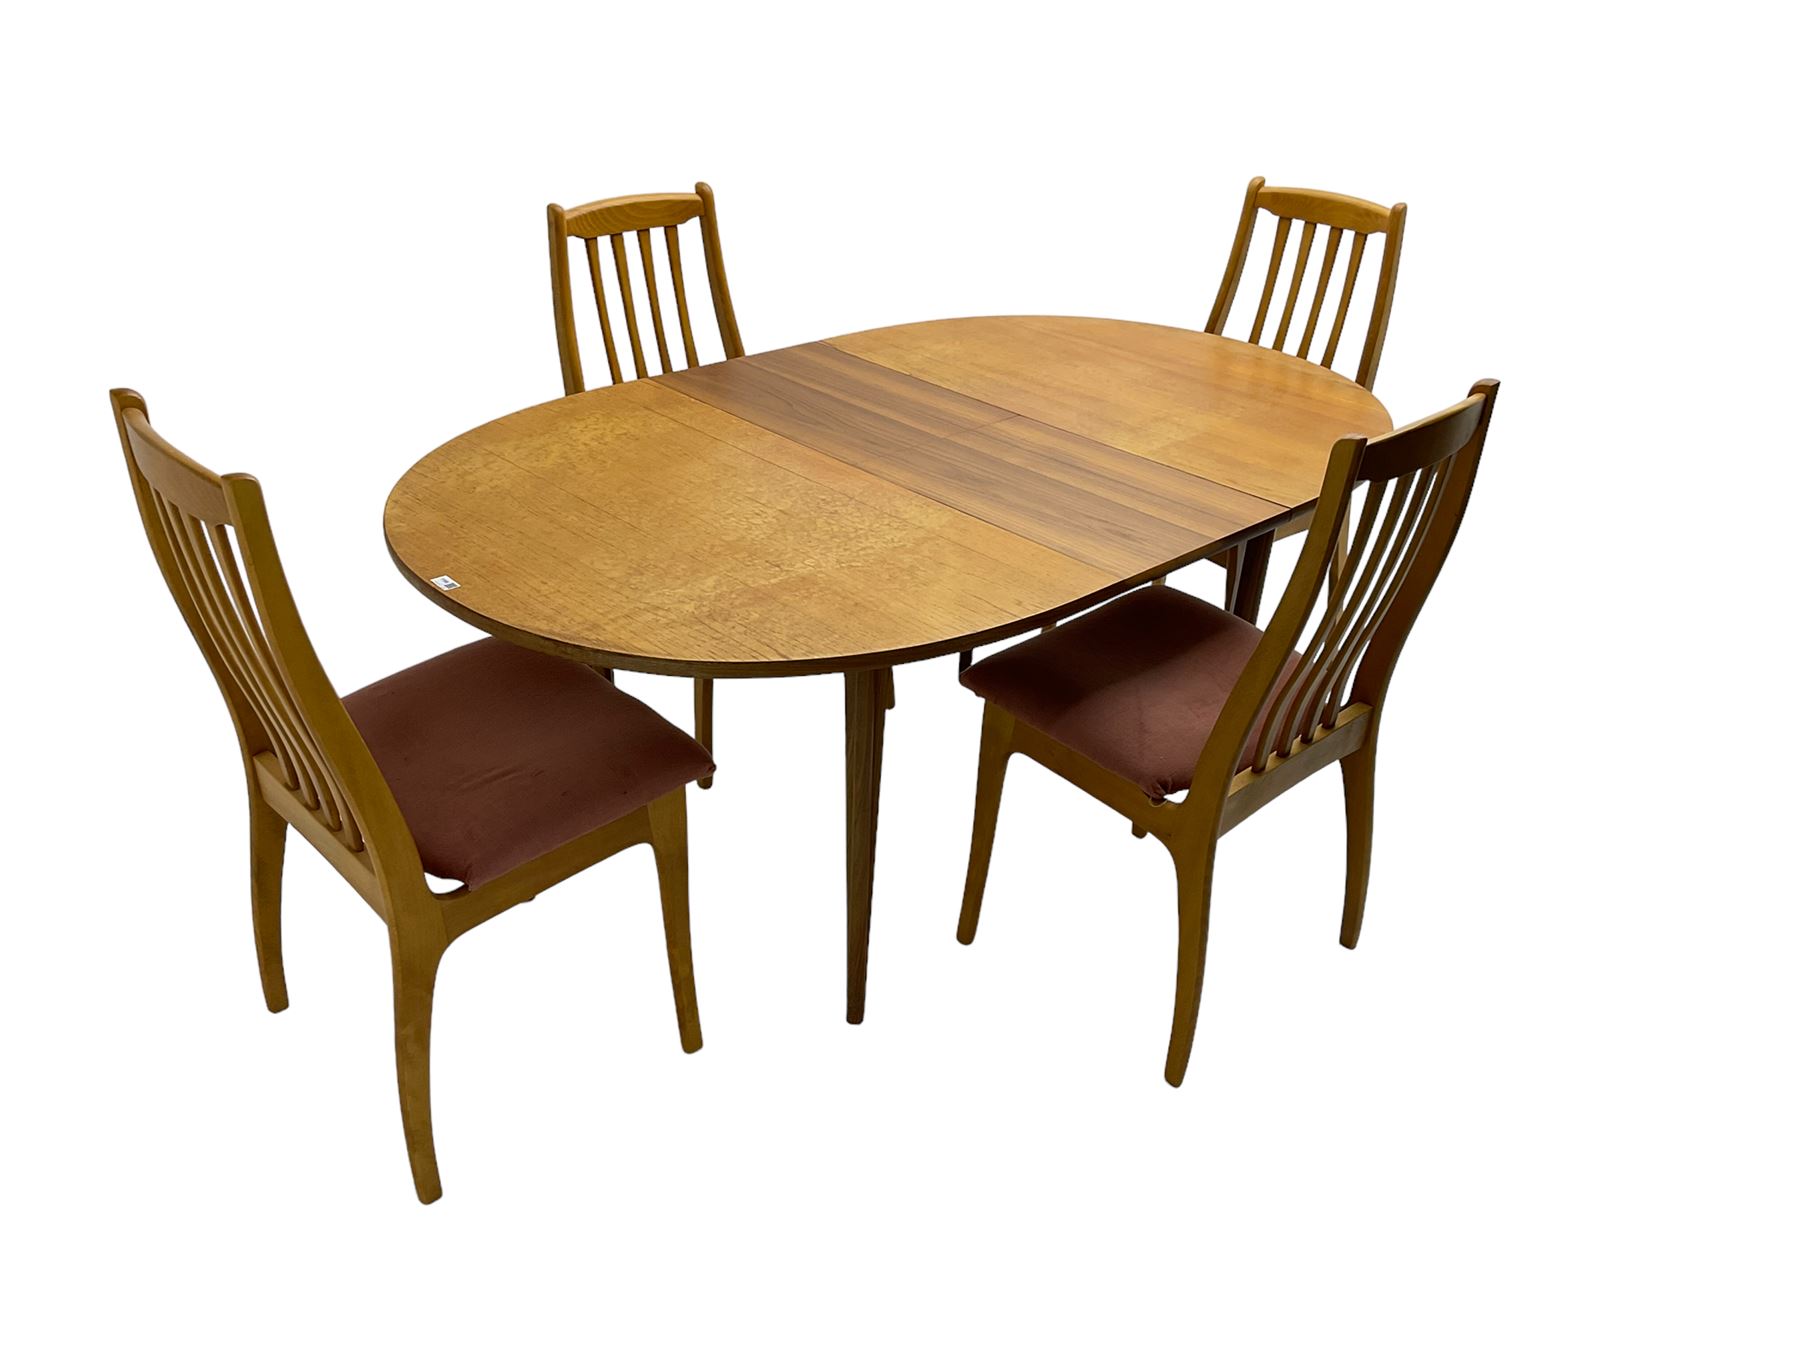 Portwood Furniture - mid-20th century teak extending dining table - Image 6 of 6